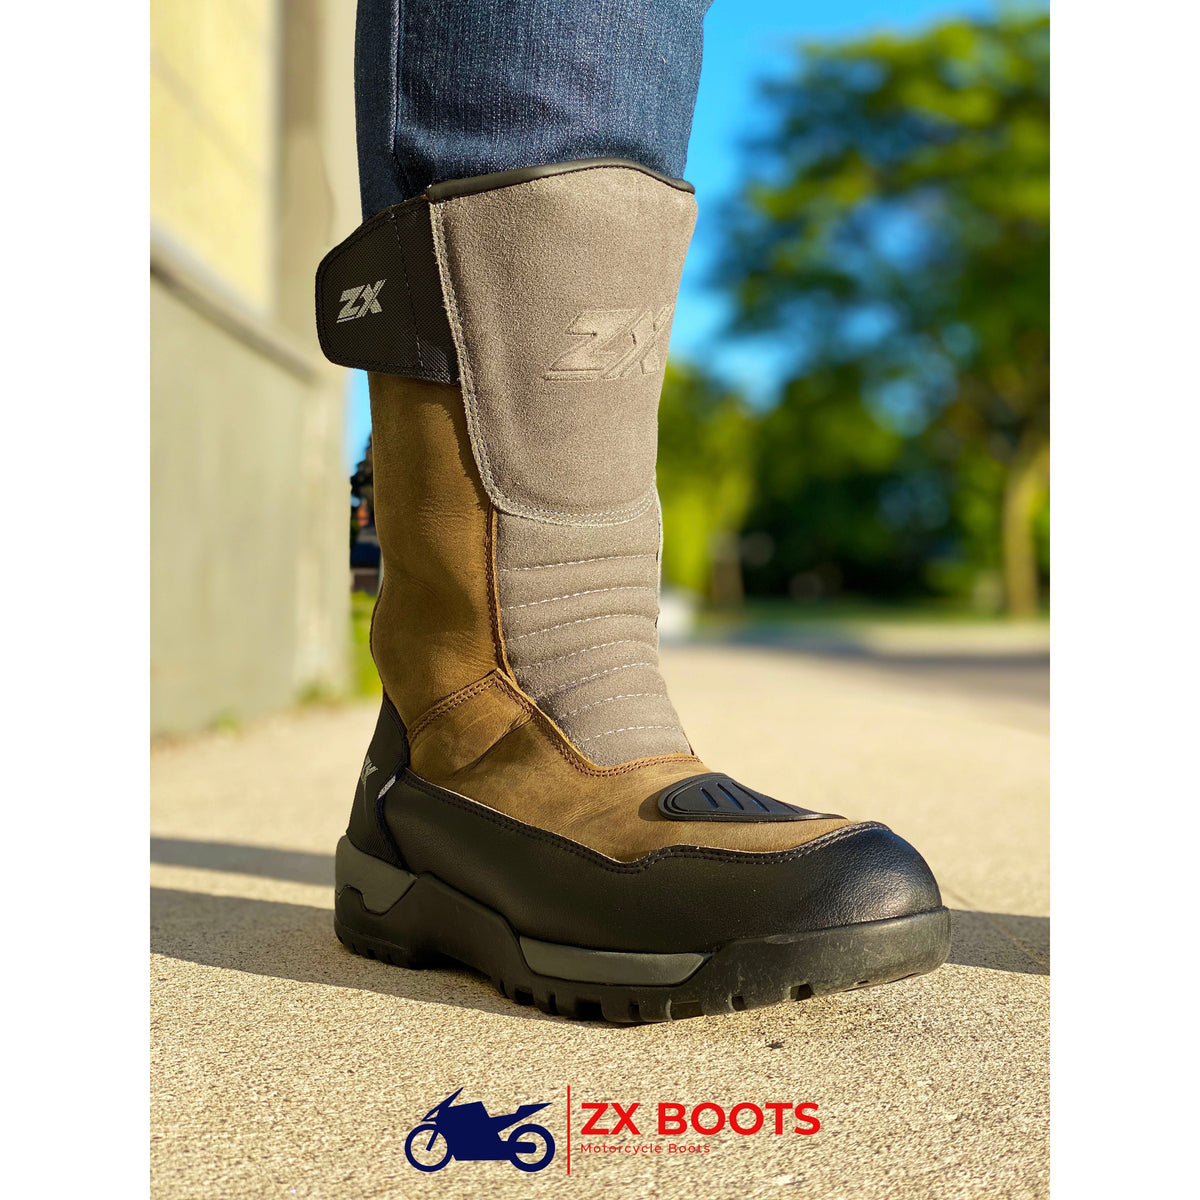 High Performance Adventure Style Boot Waterproof with Zip and 